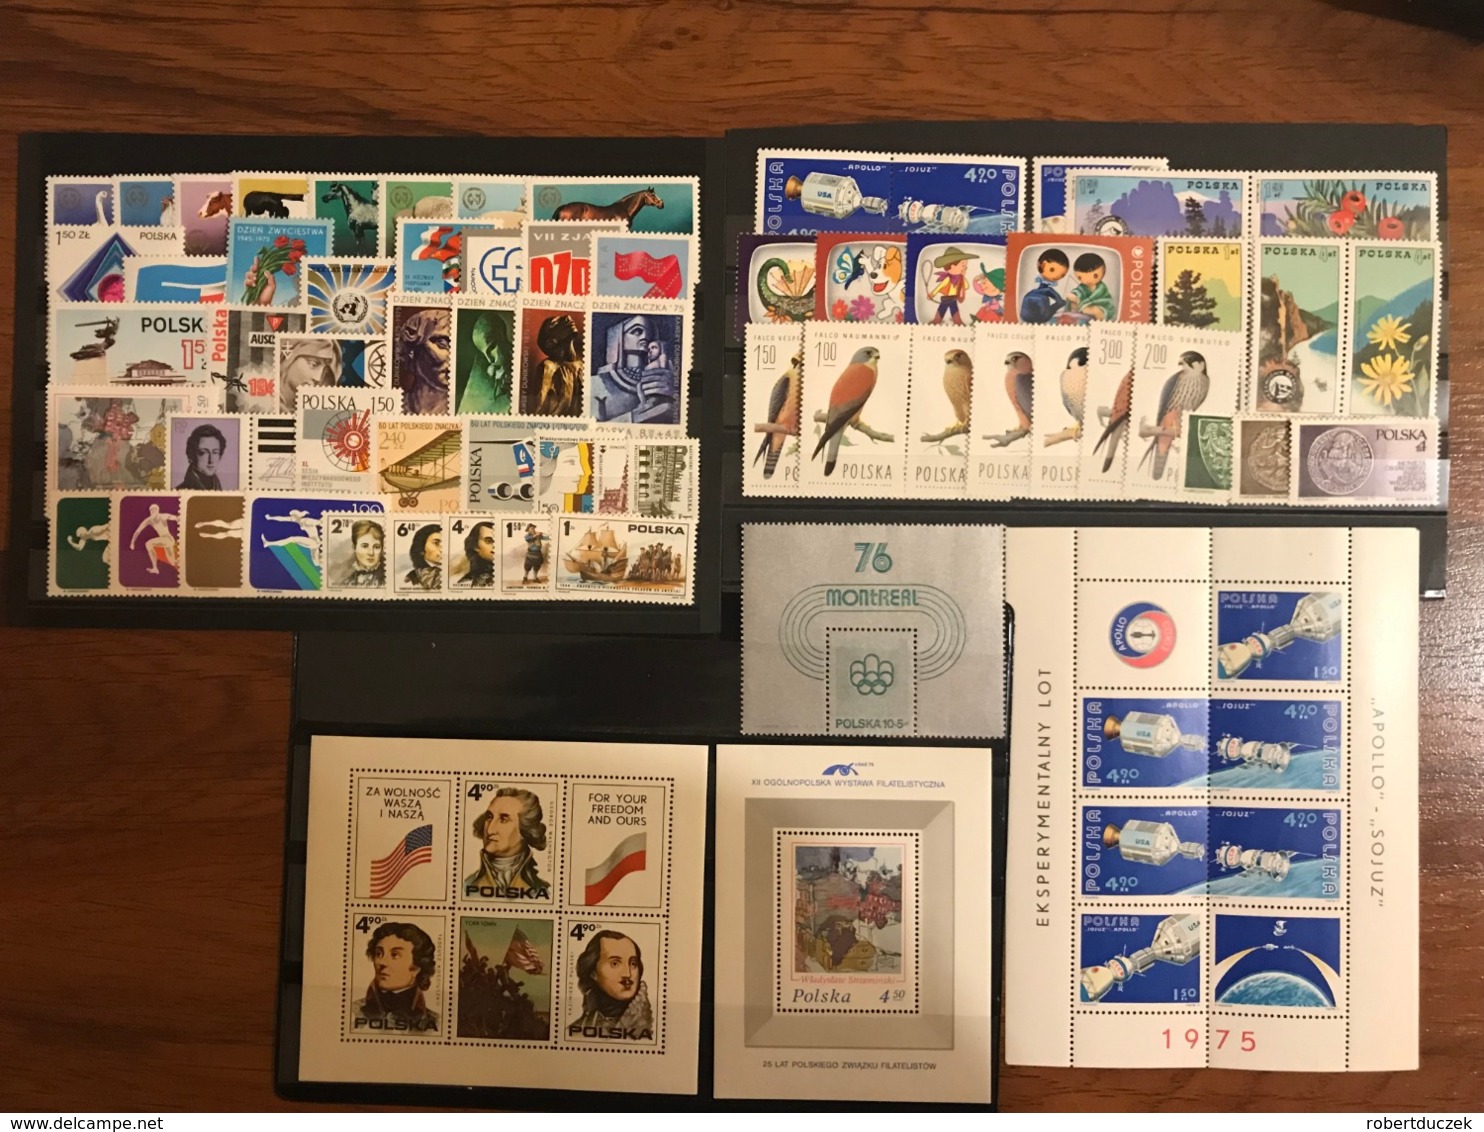 Poland 1975 Complete Year Set With Souvenir Sheets Basic MNH Perfect Mint Stamps. 64 Stamps And 4 Souvenir Sheets - Full Years